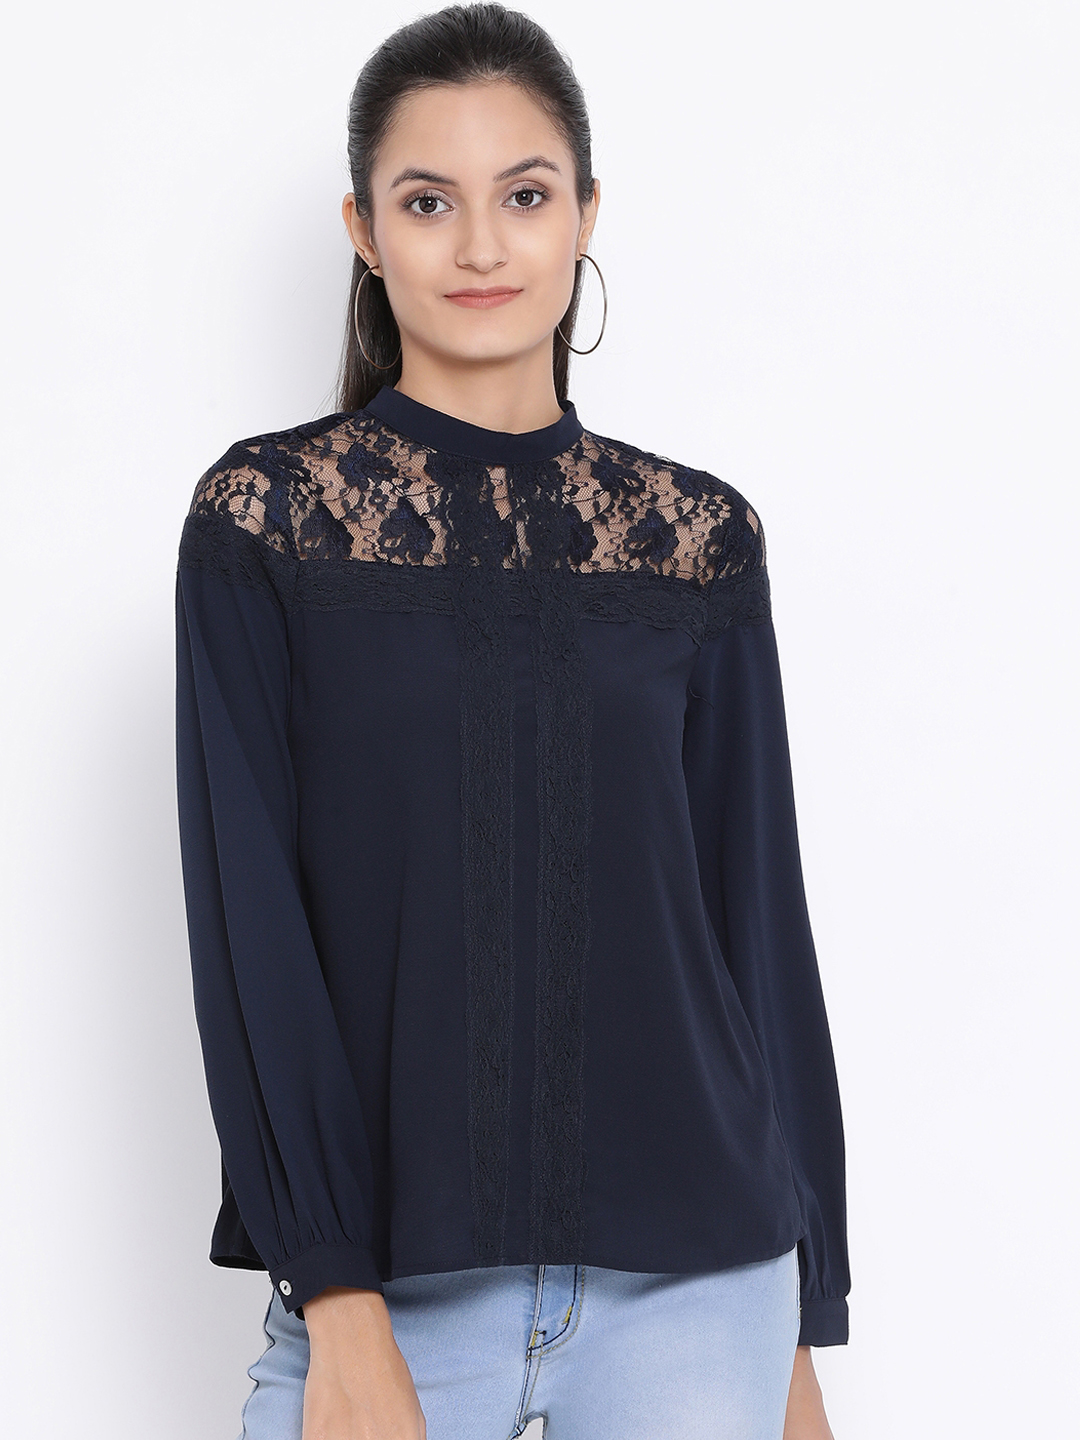 Oxolloxo Women Navy Blue Self Design A-Line Top Price in India